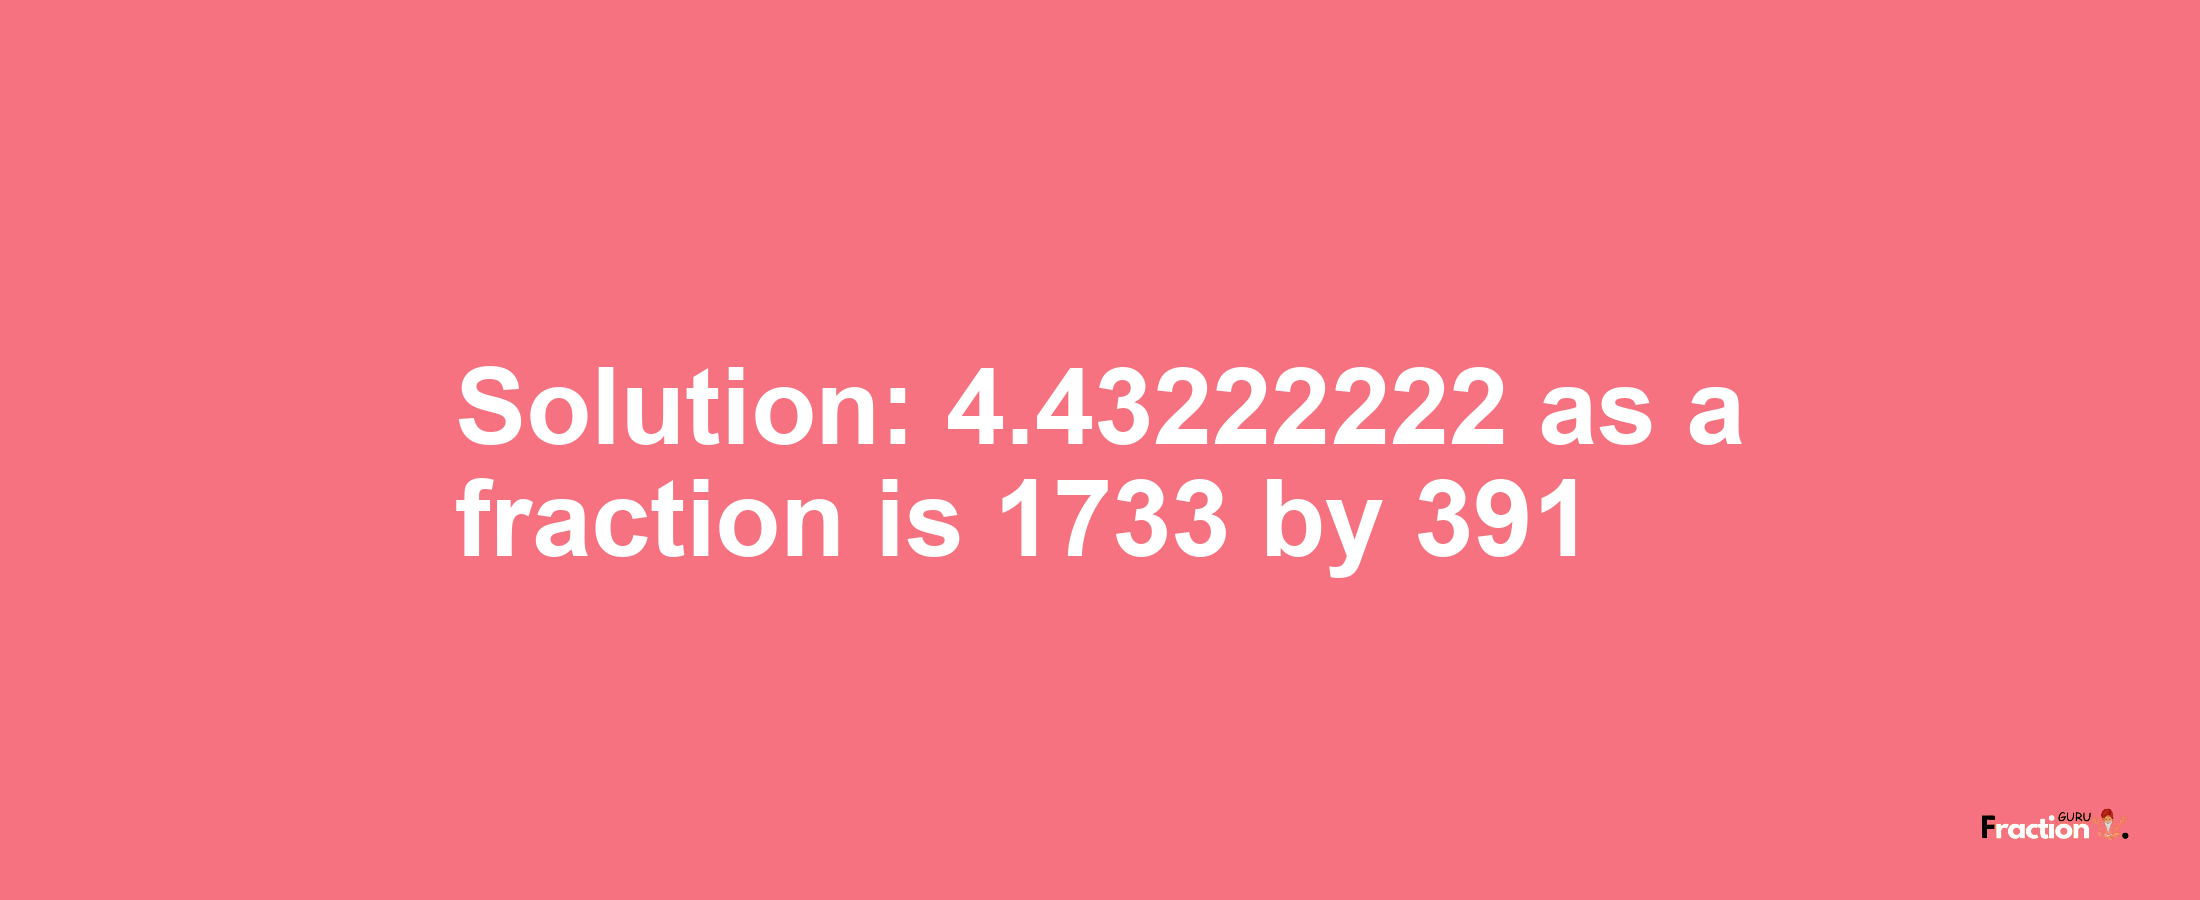 Solution:4.43222222 as a fraction is 1733/391